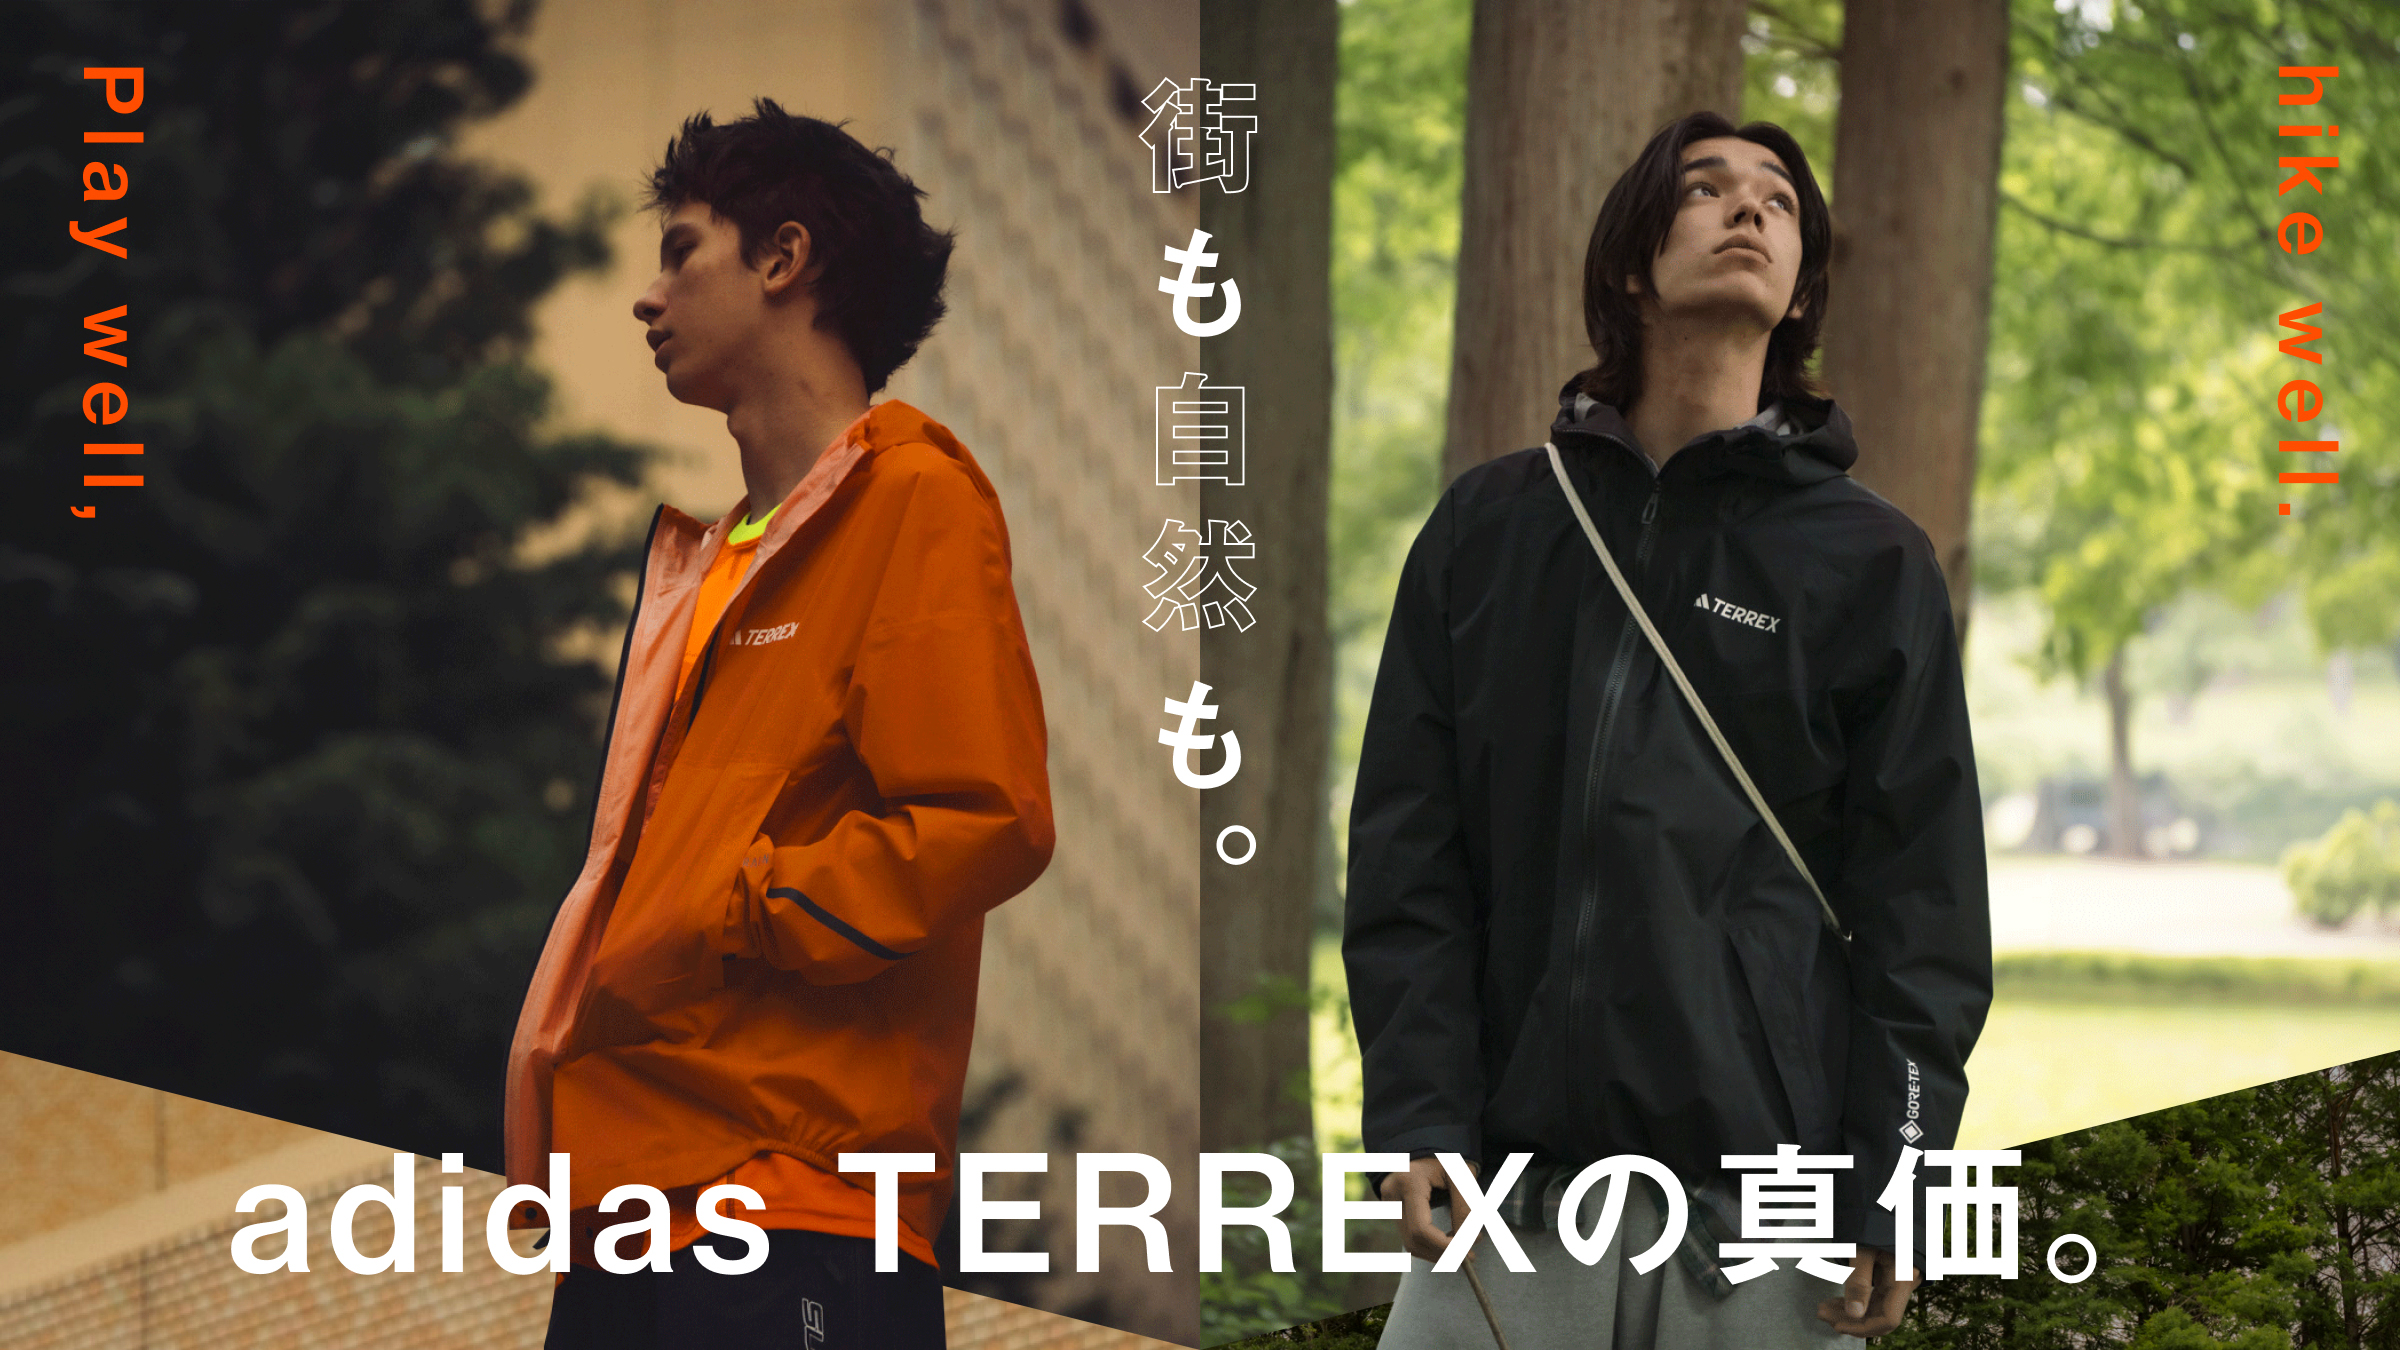 City and nature: the true value of adidas TERREX.